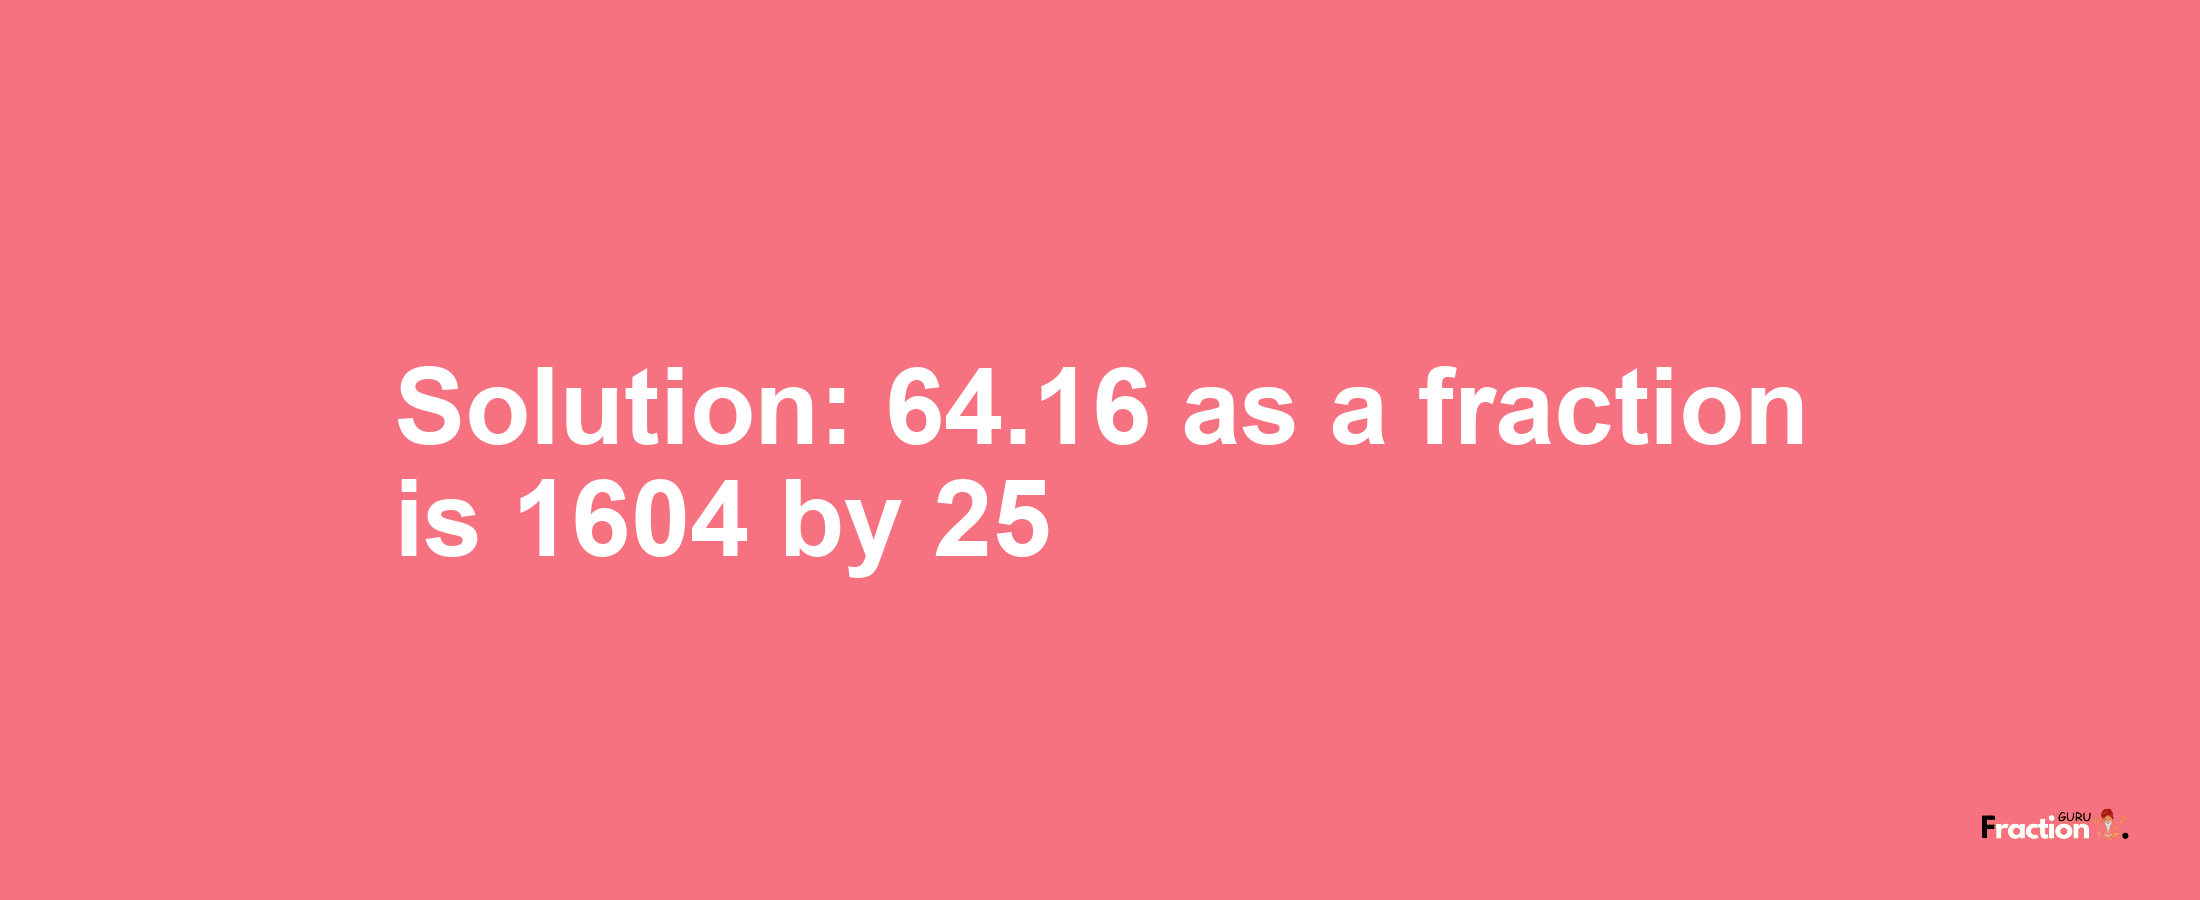 Solution:64.16 as a fraction is 1604/25